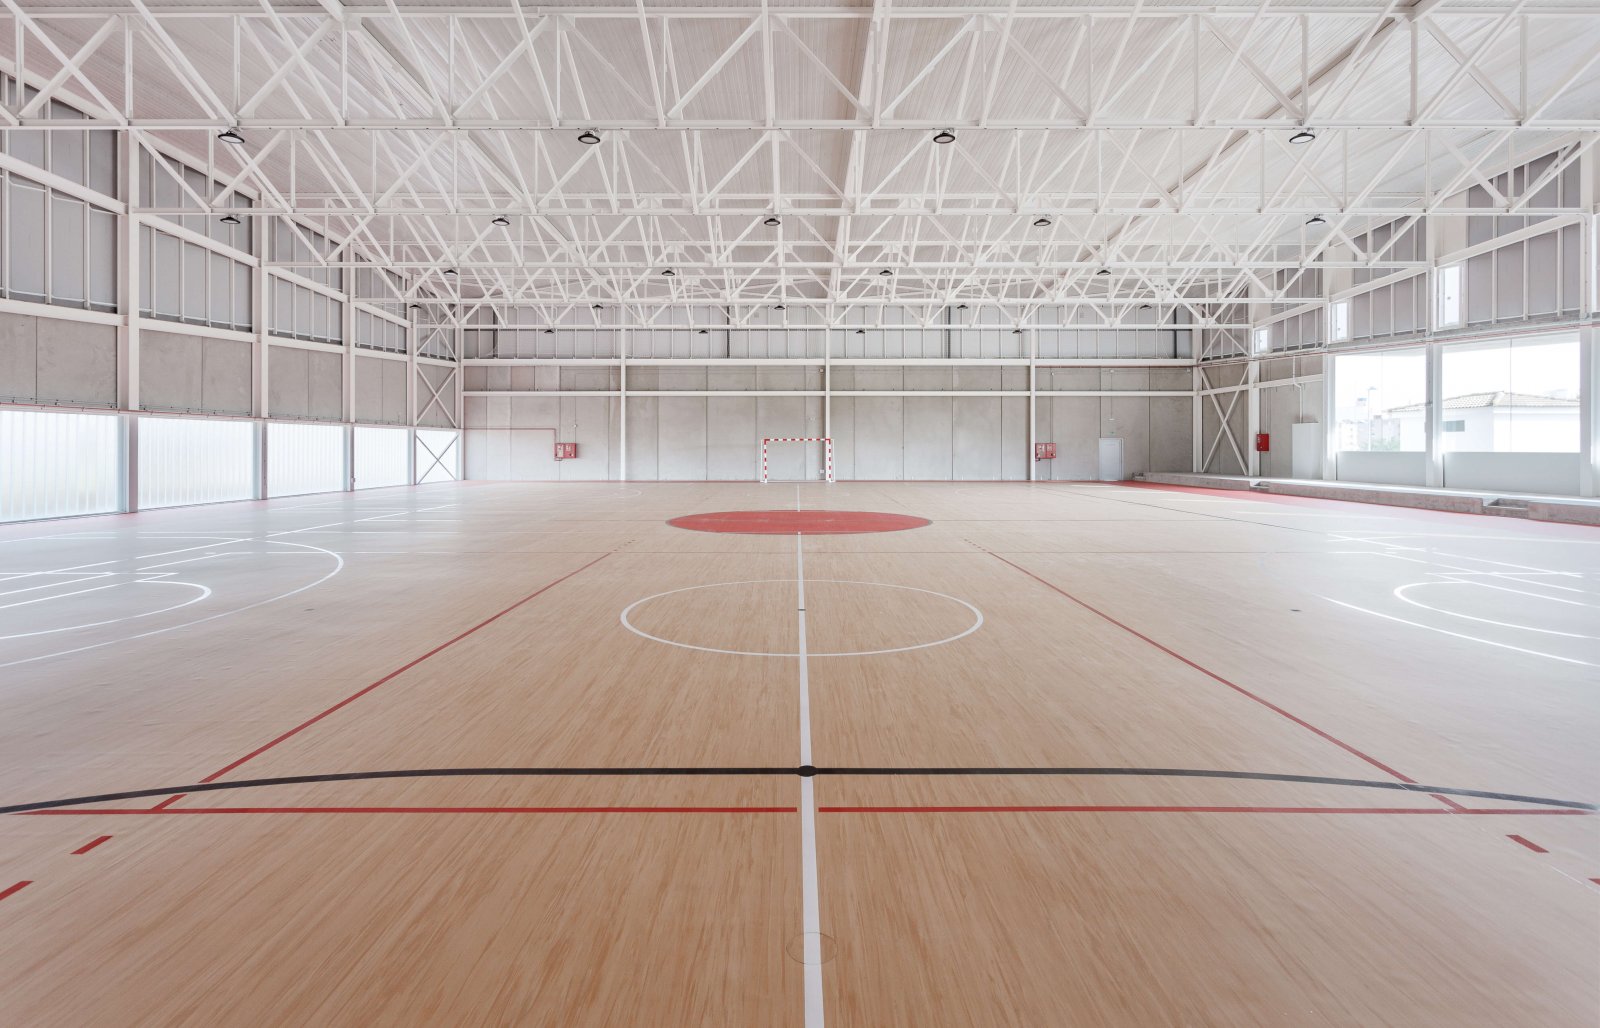 View of the sports court with parquet floors marked for basketball and football